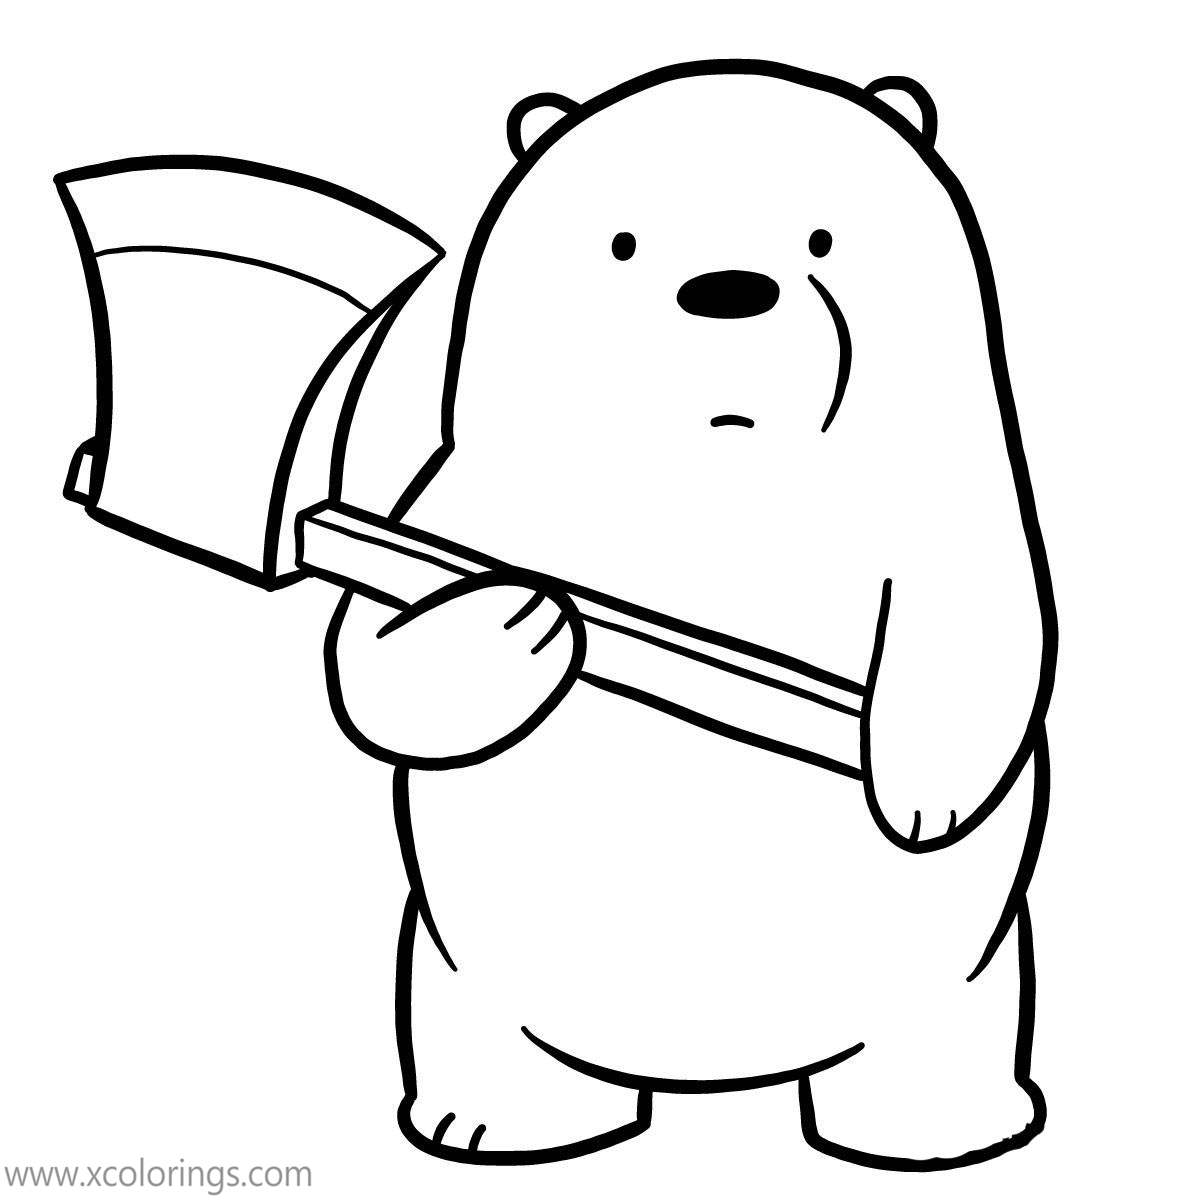 Free We Bare Bears Coloring Pages Ice Bear with Axe printable